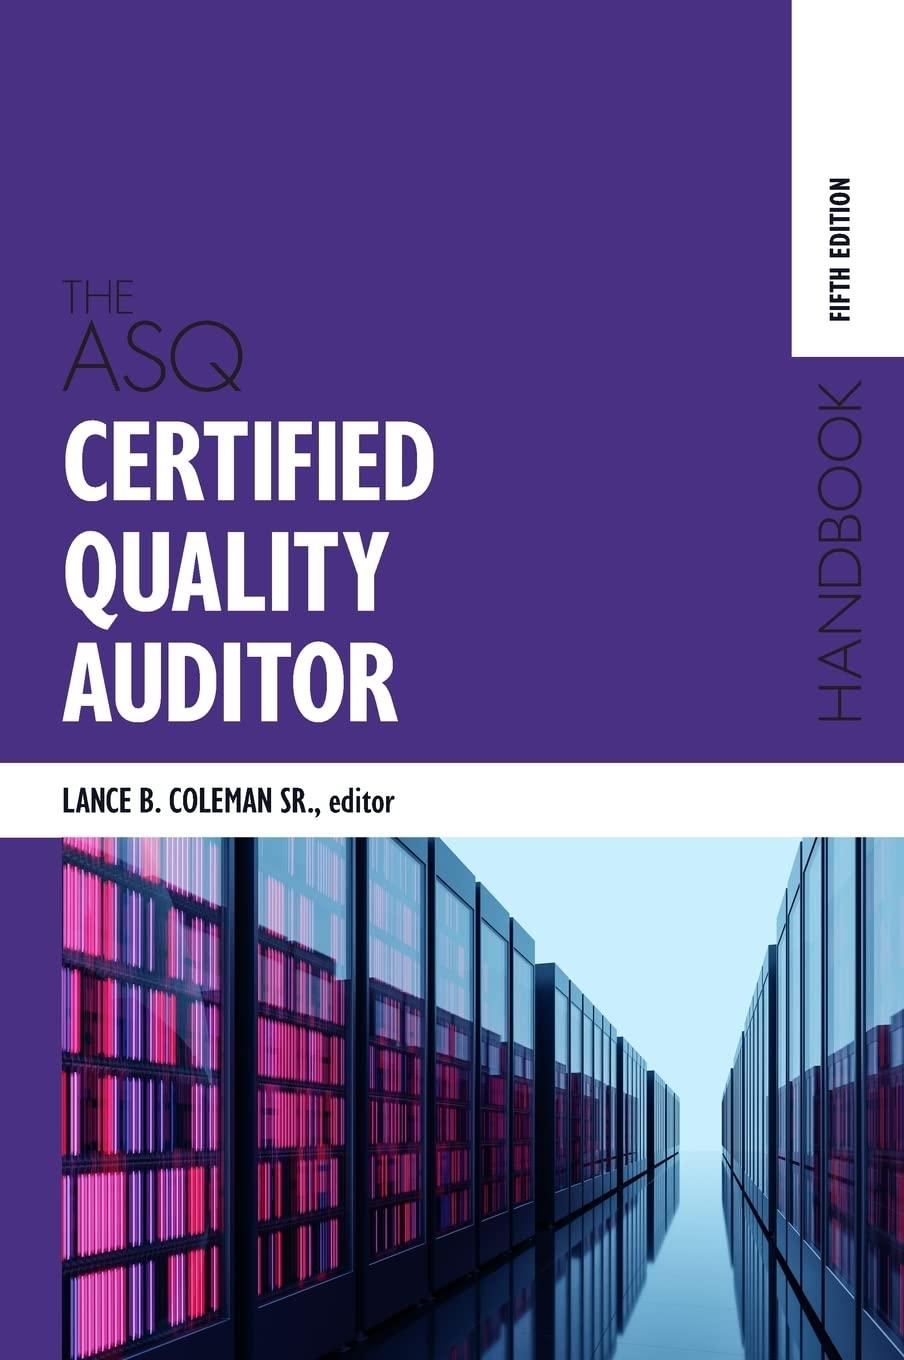 the asq certified quality auditor handbook 5th edition lance b coleman 1951058097, 978-1951058098